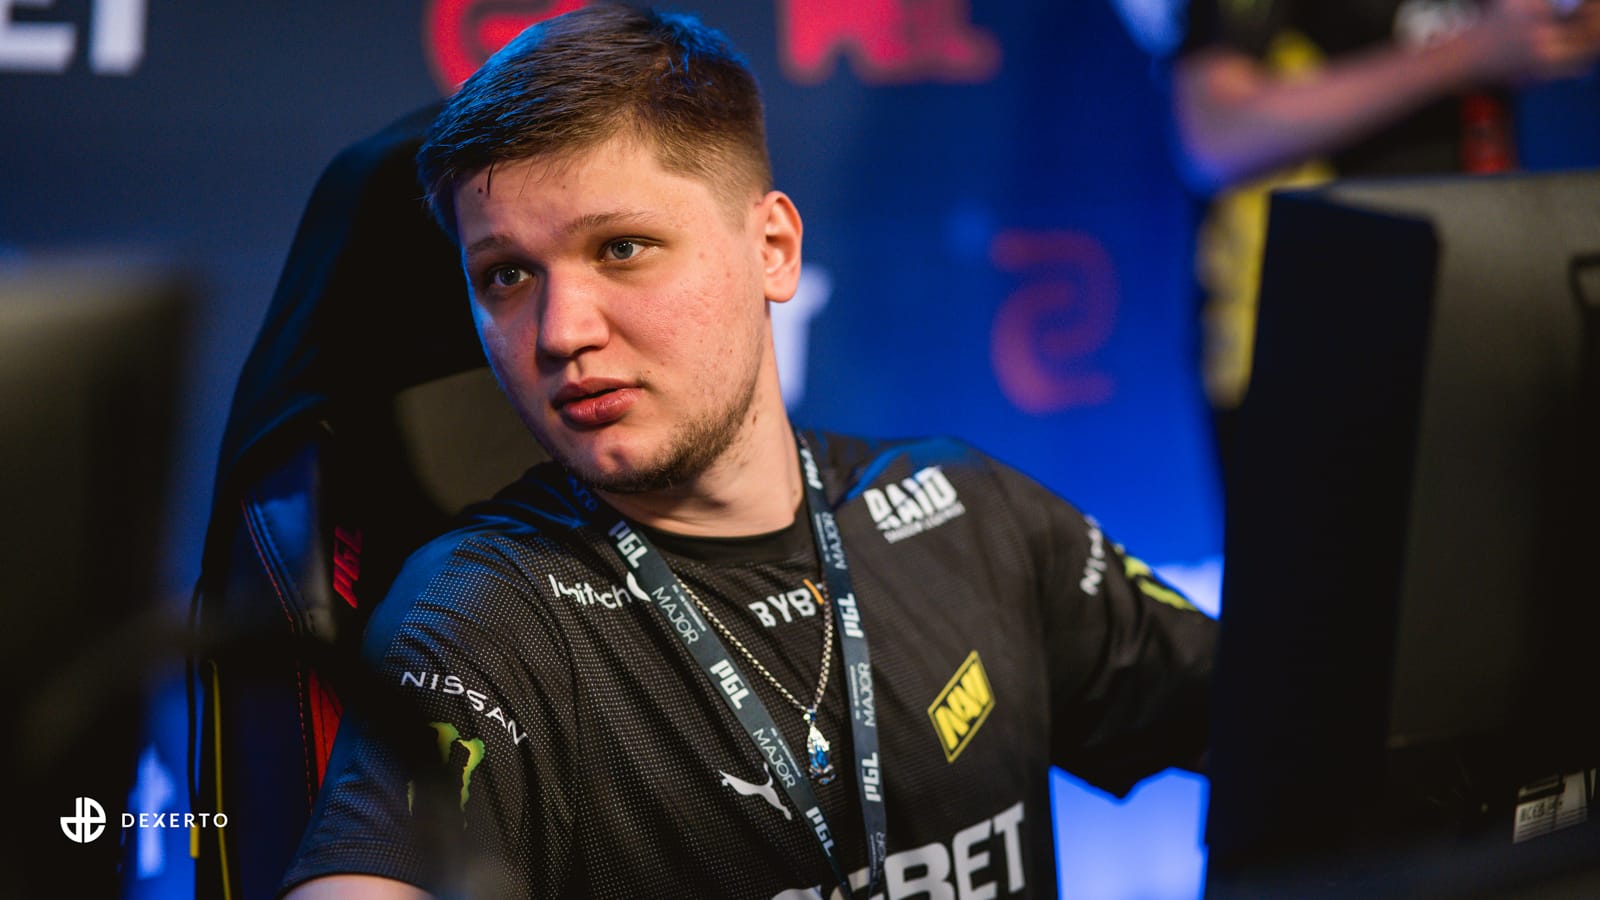 CSGO star s1mple says he would "destroy" if he joined NAVI's Valorant team Dexerto